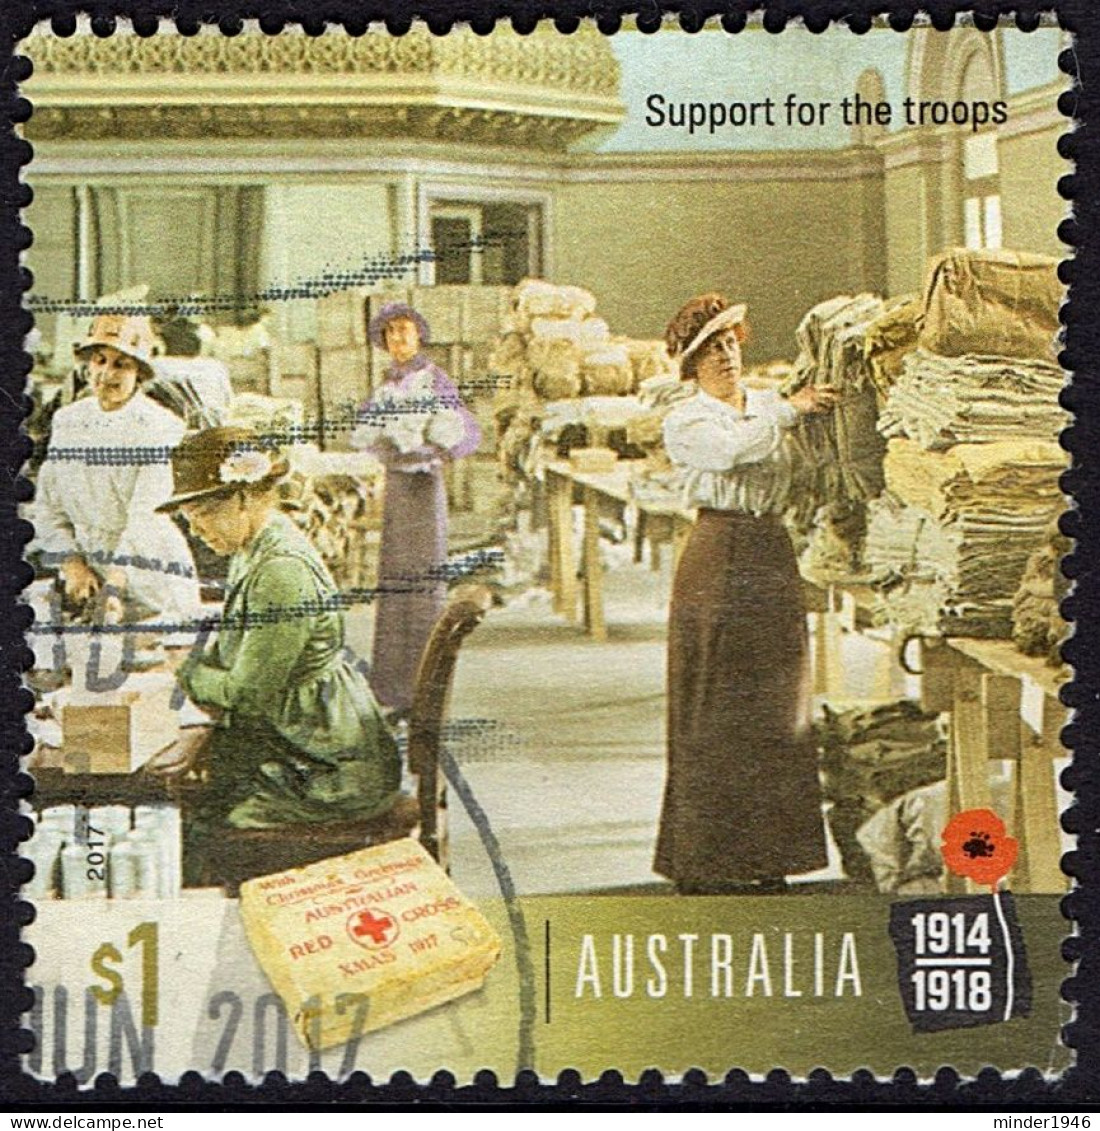 AUSTRALIA 2017 $1 Multicoloured, Centenary Of WWI 1917-Support For The Troops Used - Gebraucht